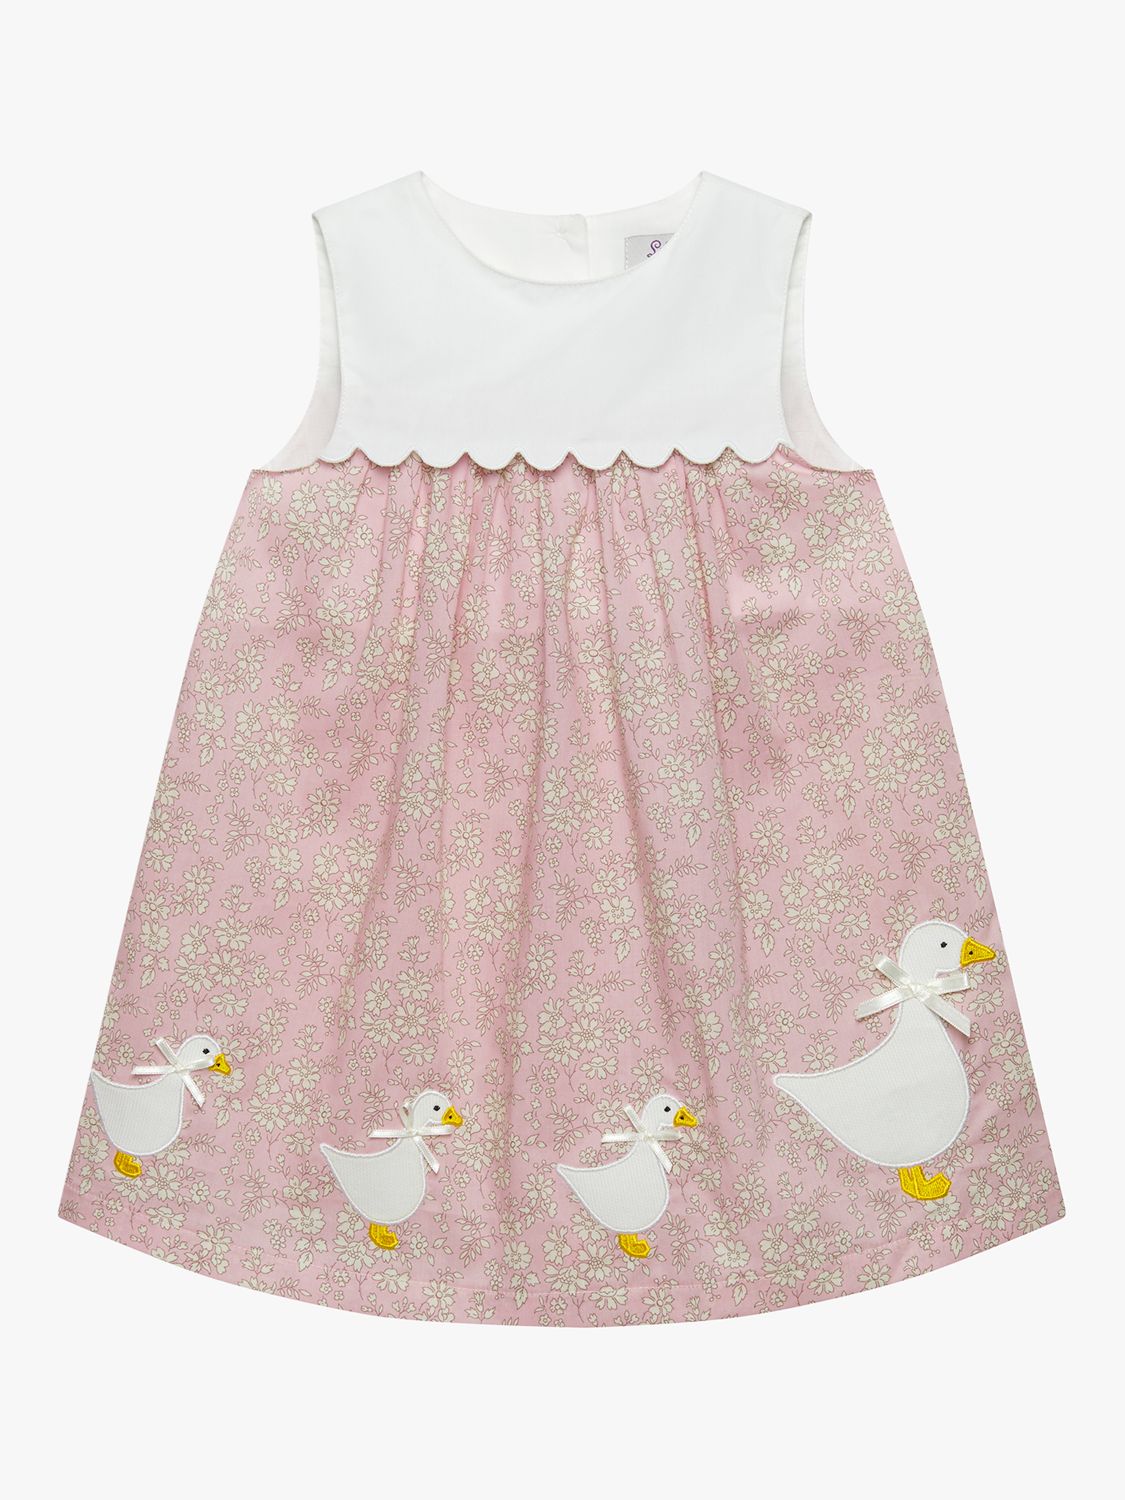 Trotters Baby Floral Capel Print Duck Dress, Pink/Multi, 3-6 months